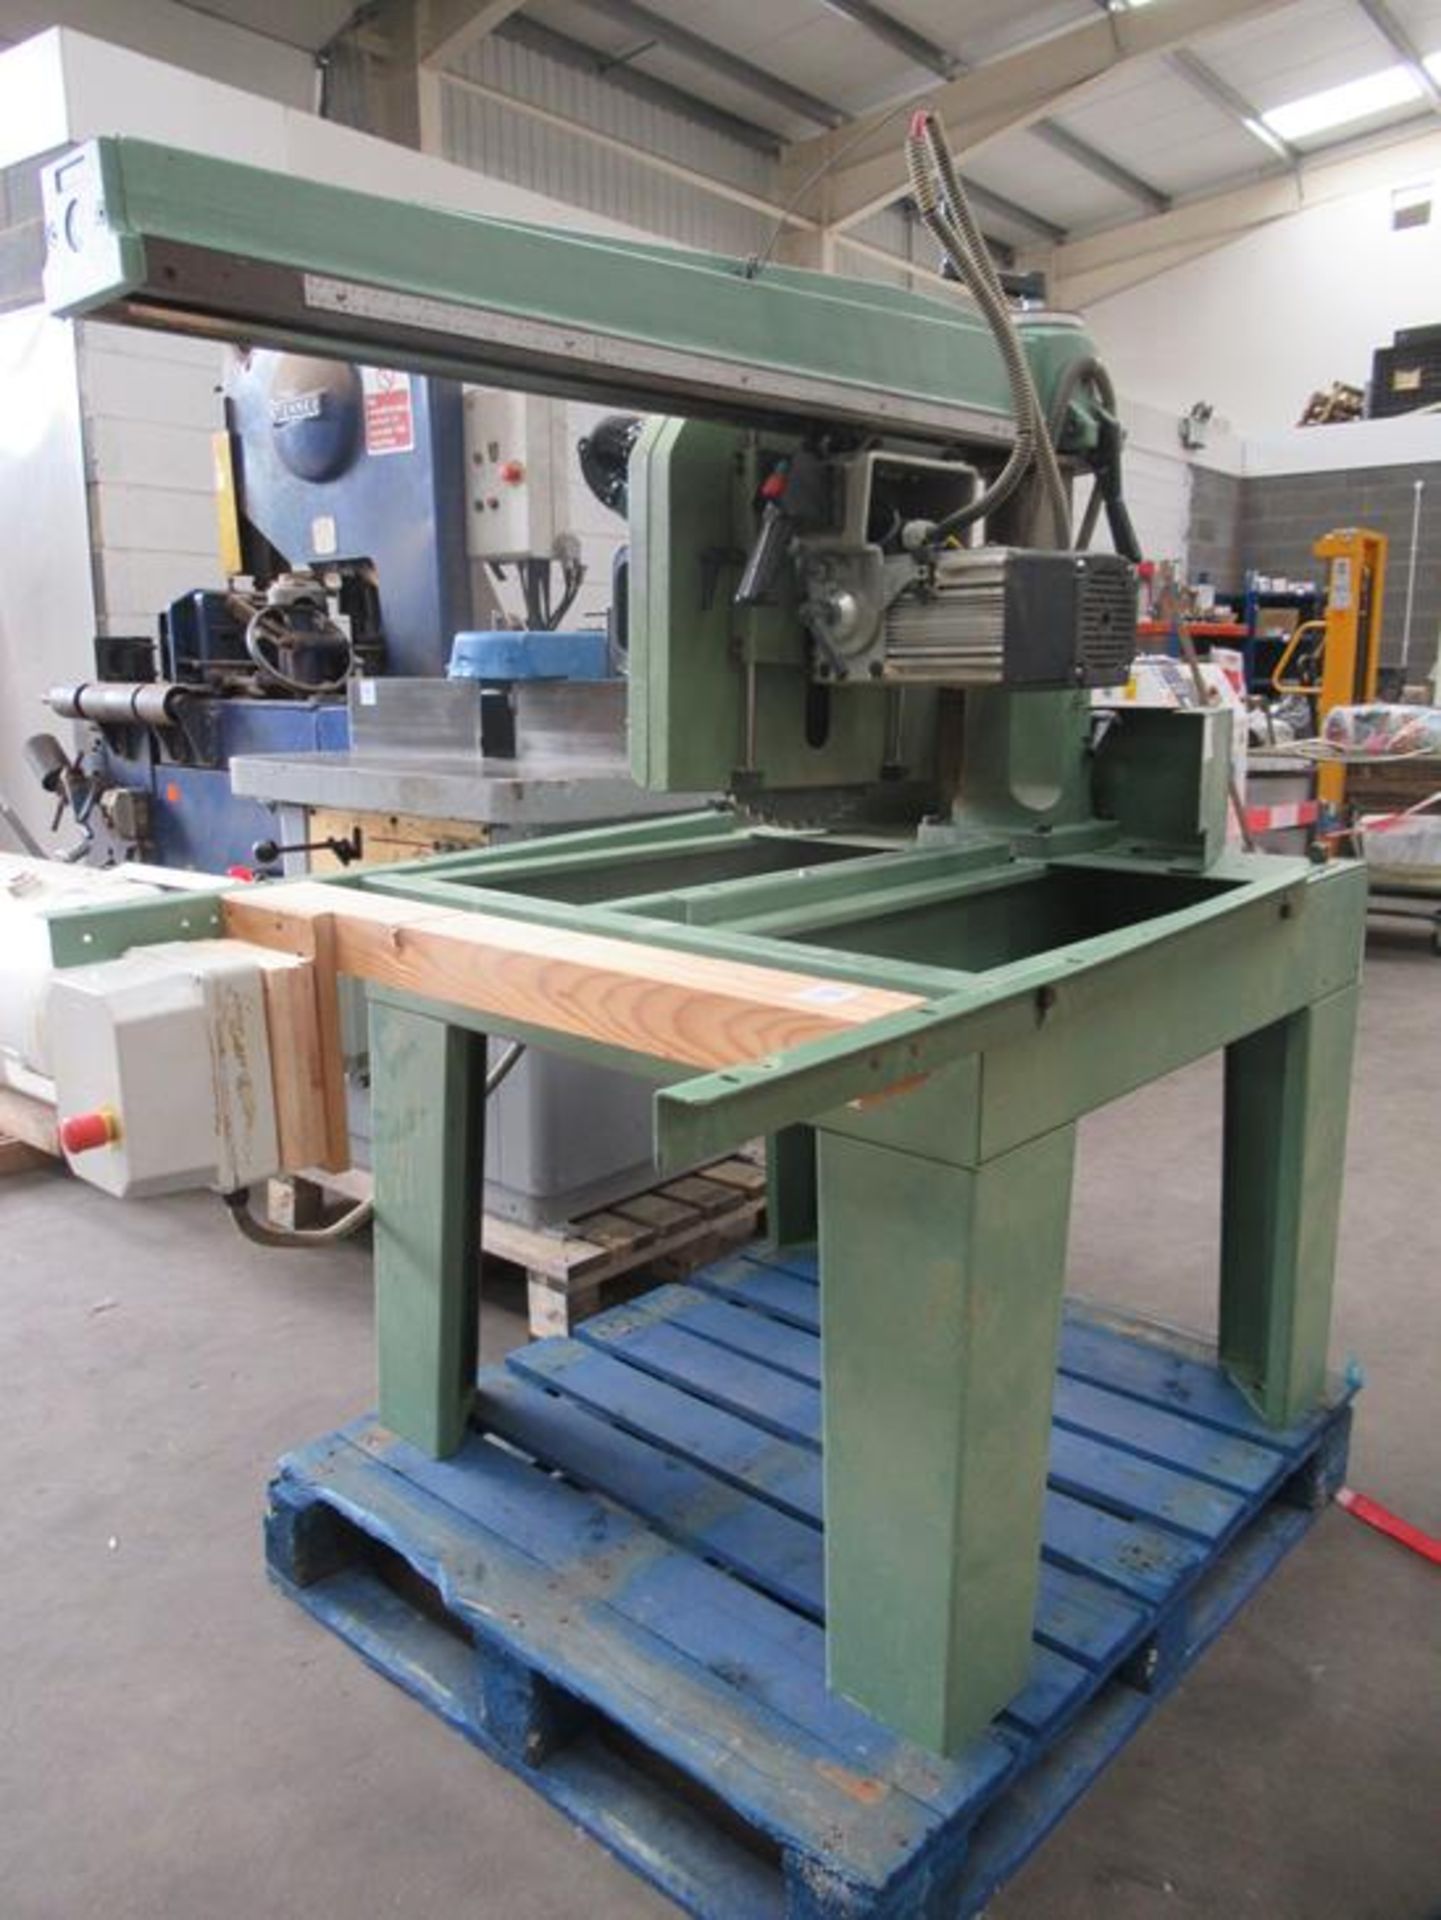 Maggi Radial Arm Saw 400V. Please note there is a £15 plus VAT Lift Out Fee on this lot